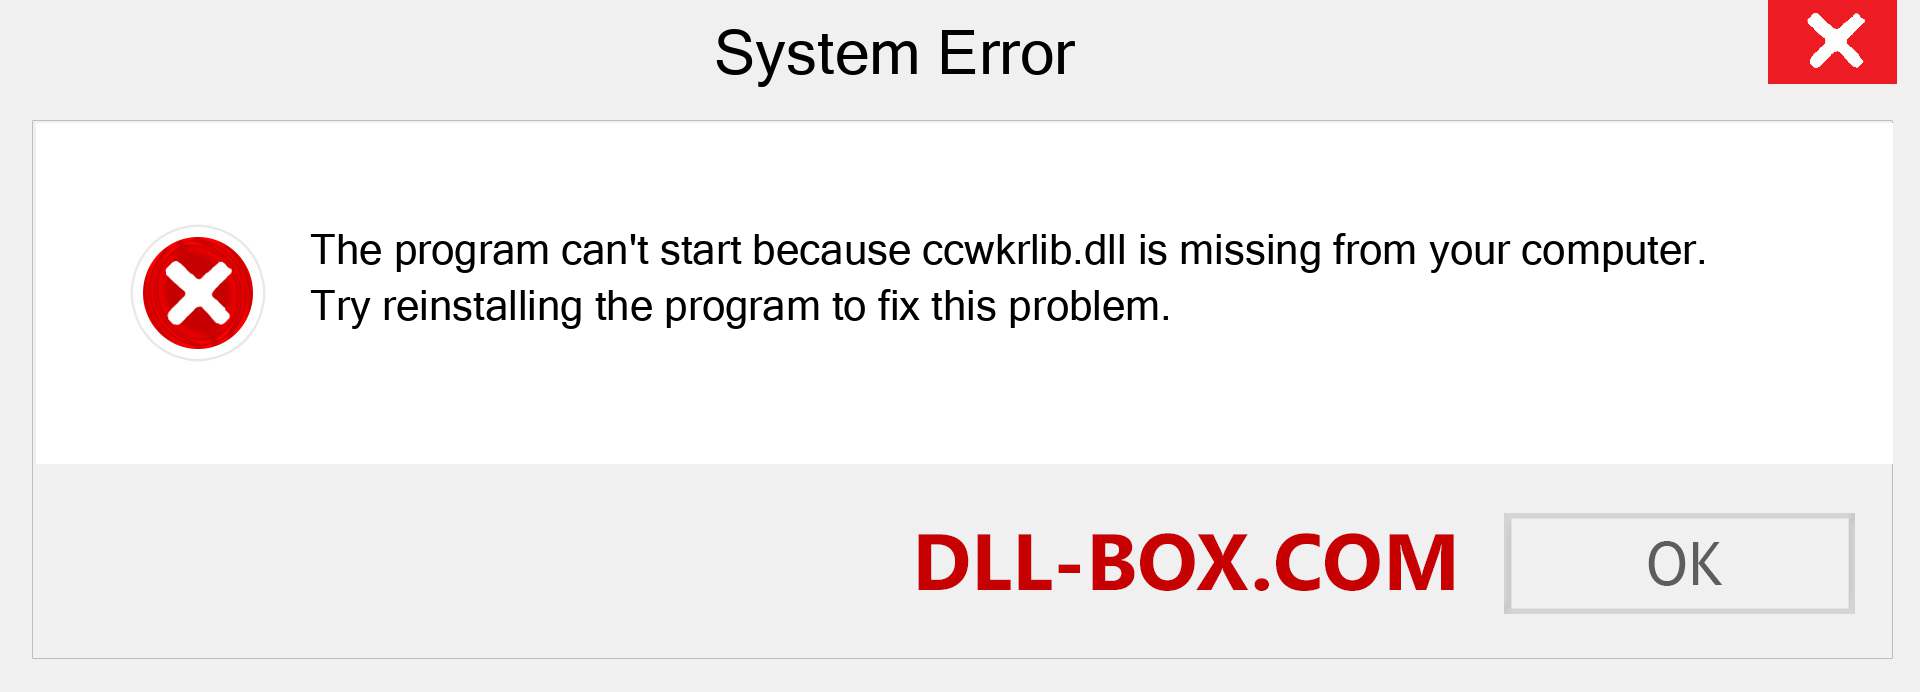  ccwkrlib.dll file is missing?. Download for Windows 7, 8, 10 - Fix  ccwkrlib dll Missing Error on Windows, photos, images